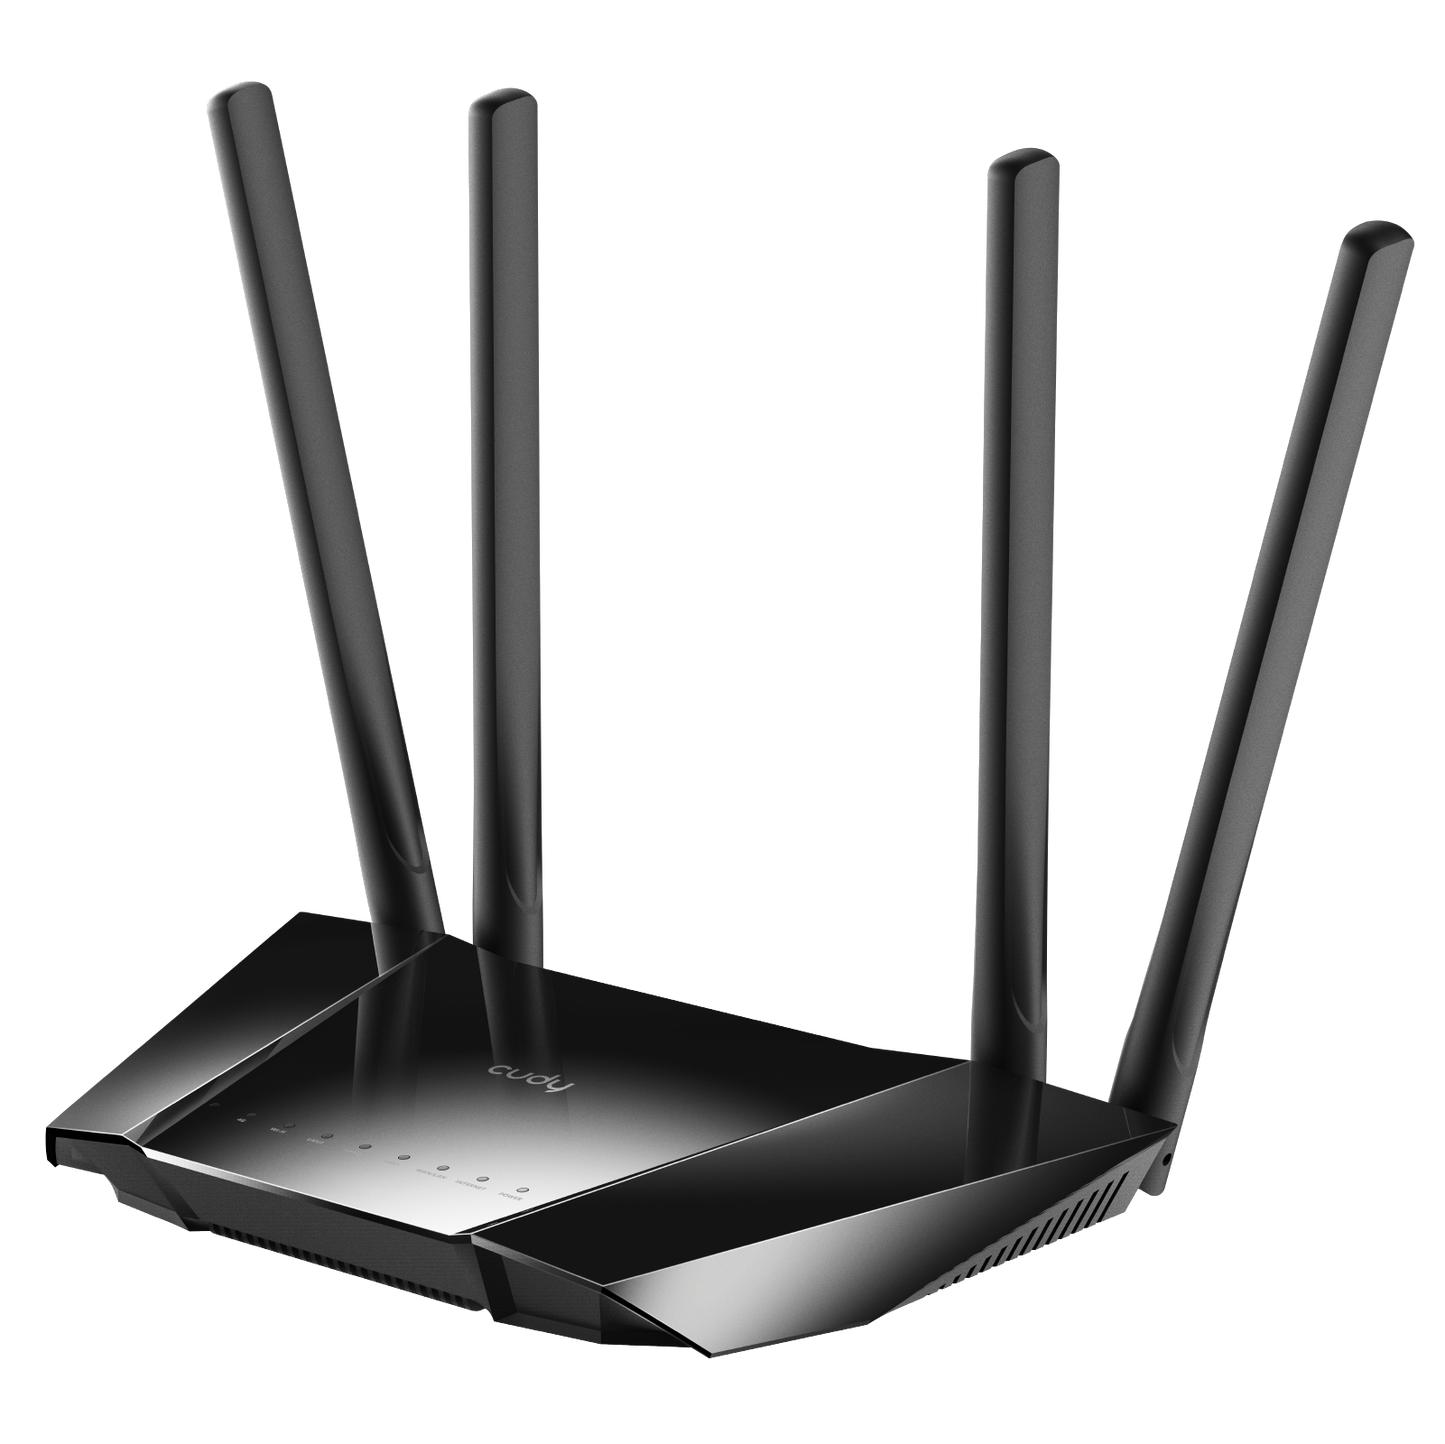 4G N300 Wi-Fi Router, LT400 1.0